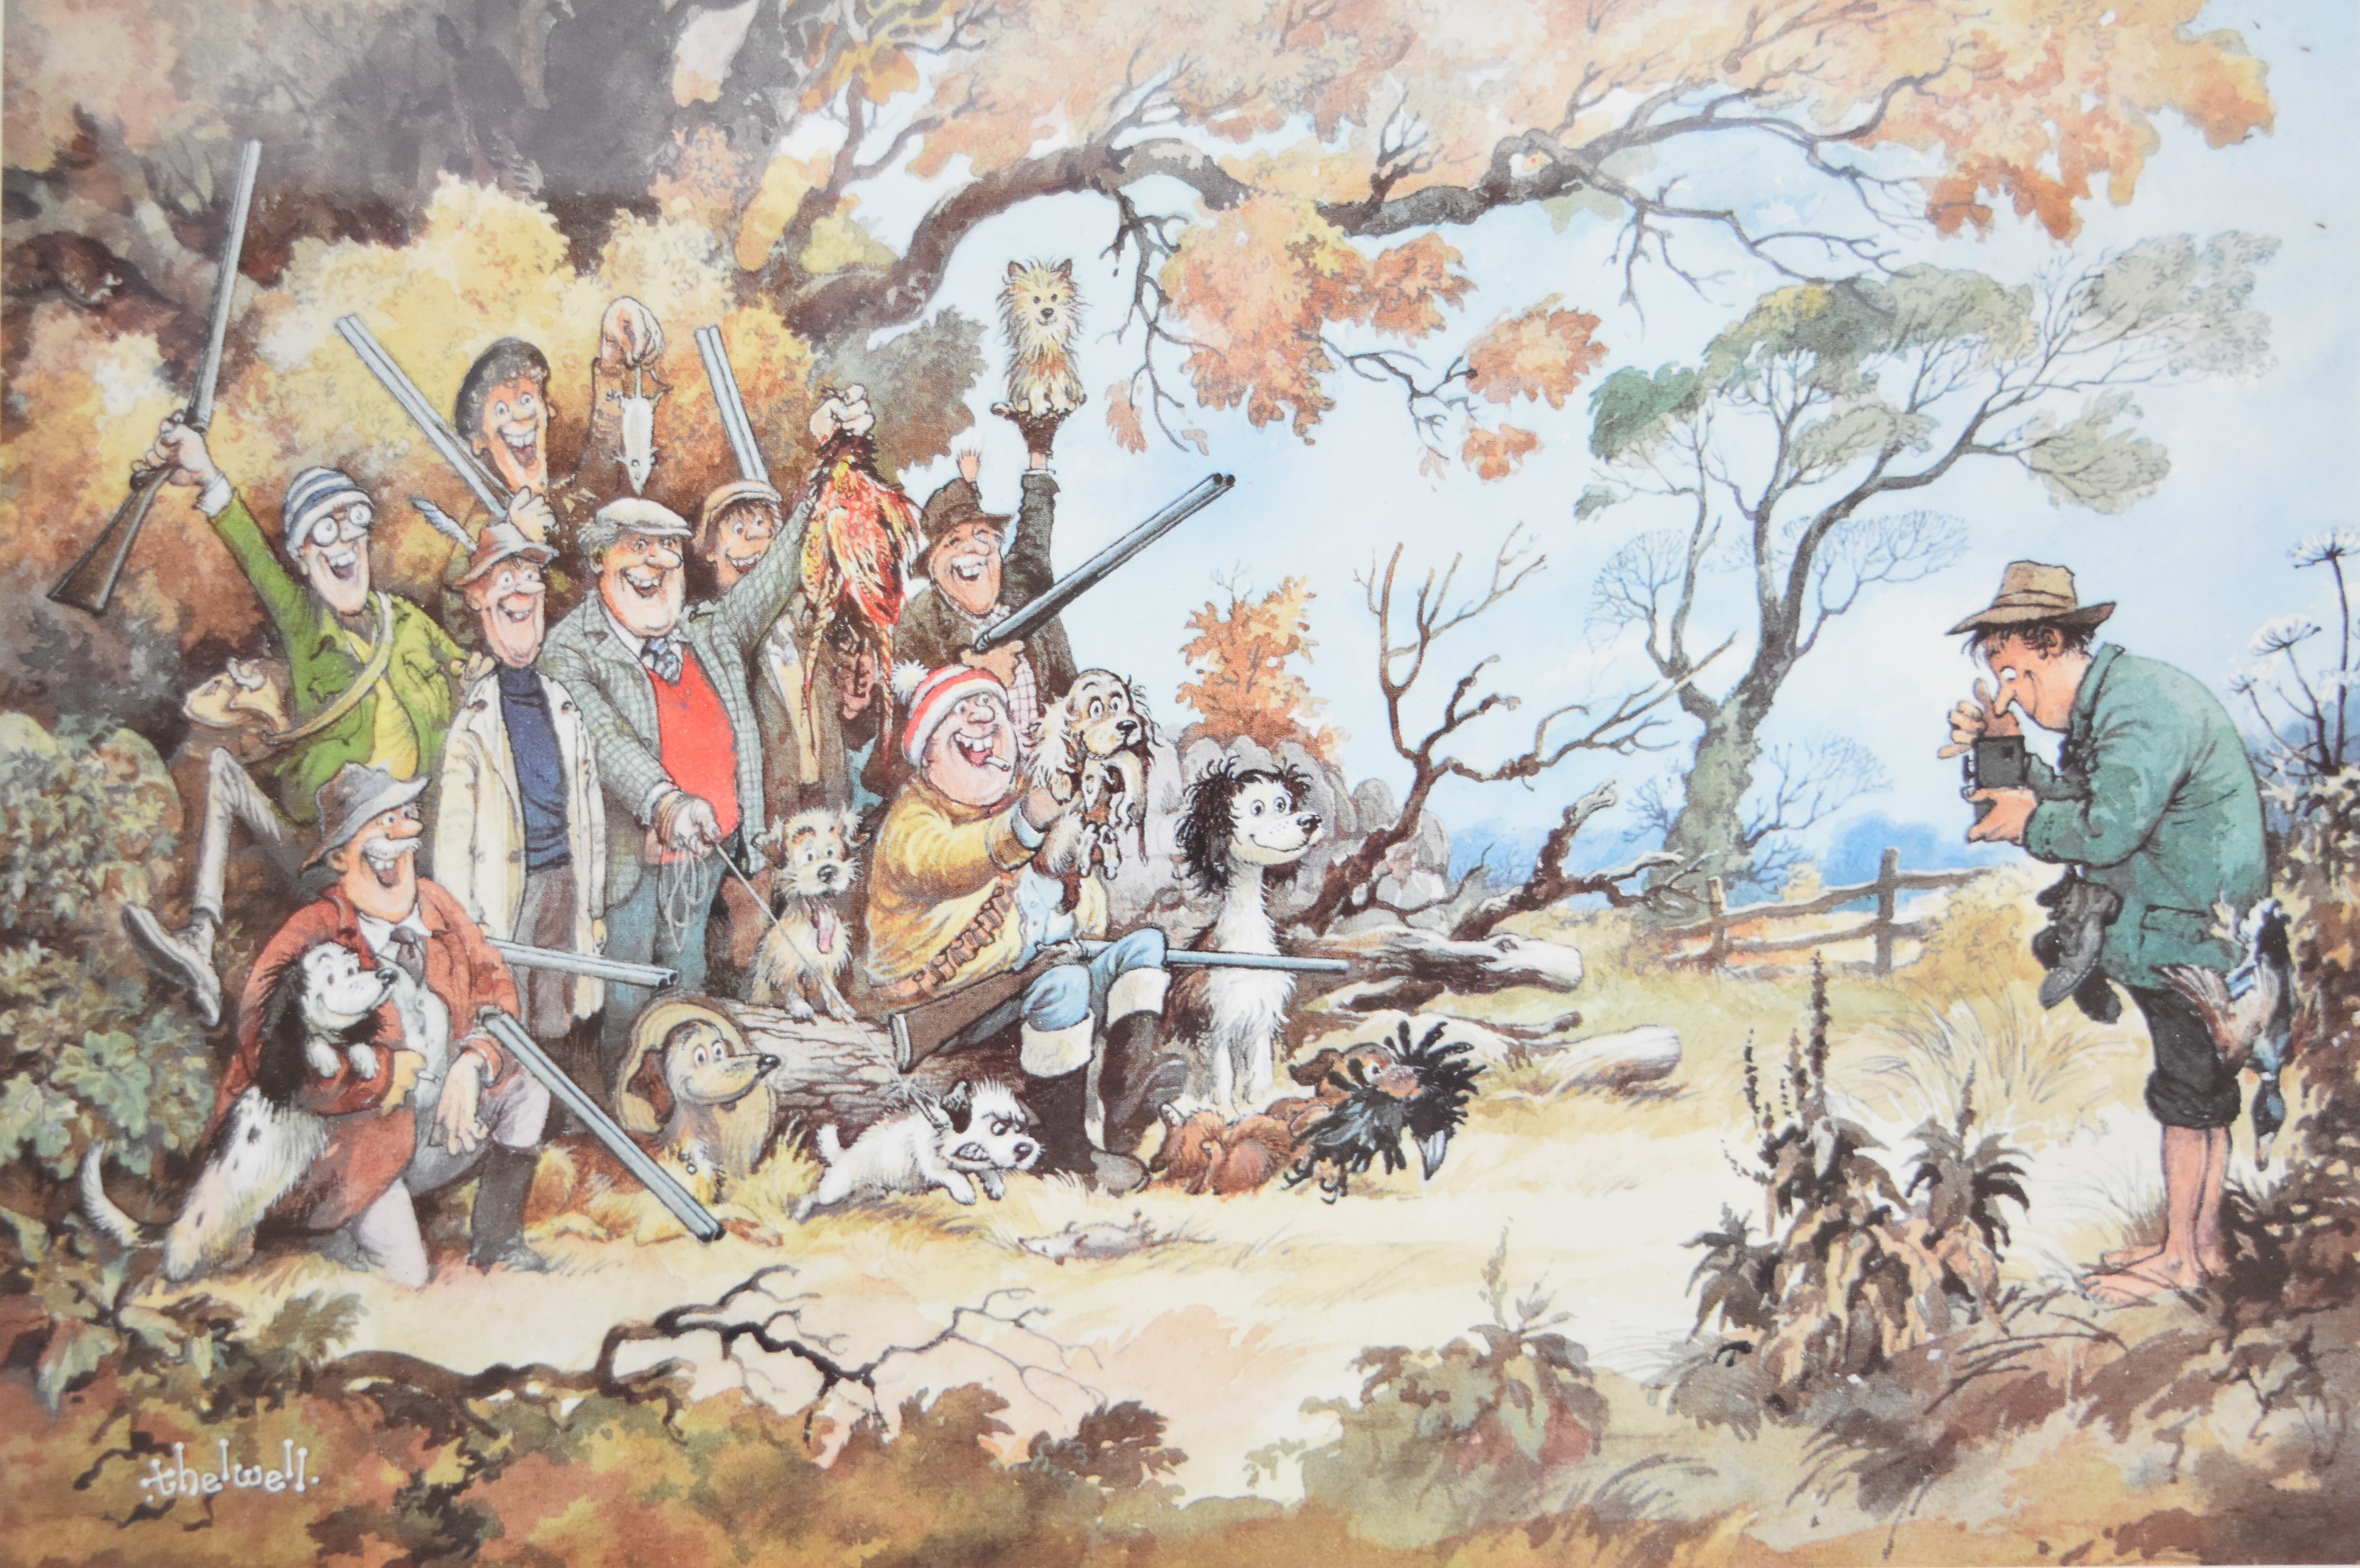 Two Norman Thelwell signed limited edition of 850 prints 'The Smooth Shoot' and 'The Royal Shoot', - Image 7 of 10